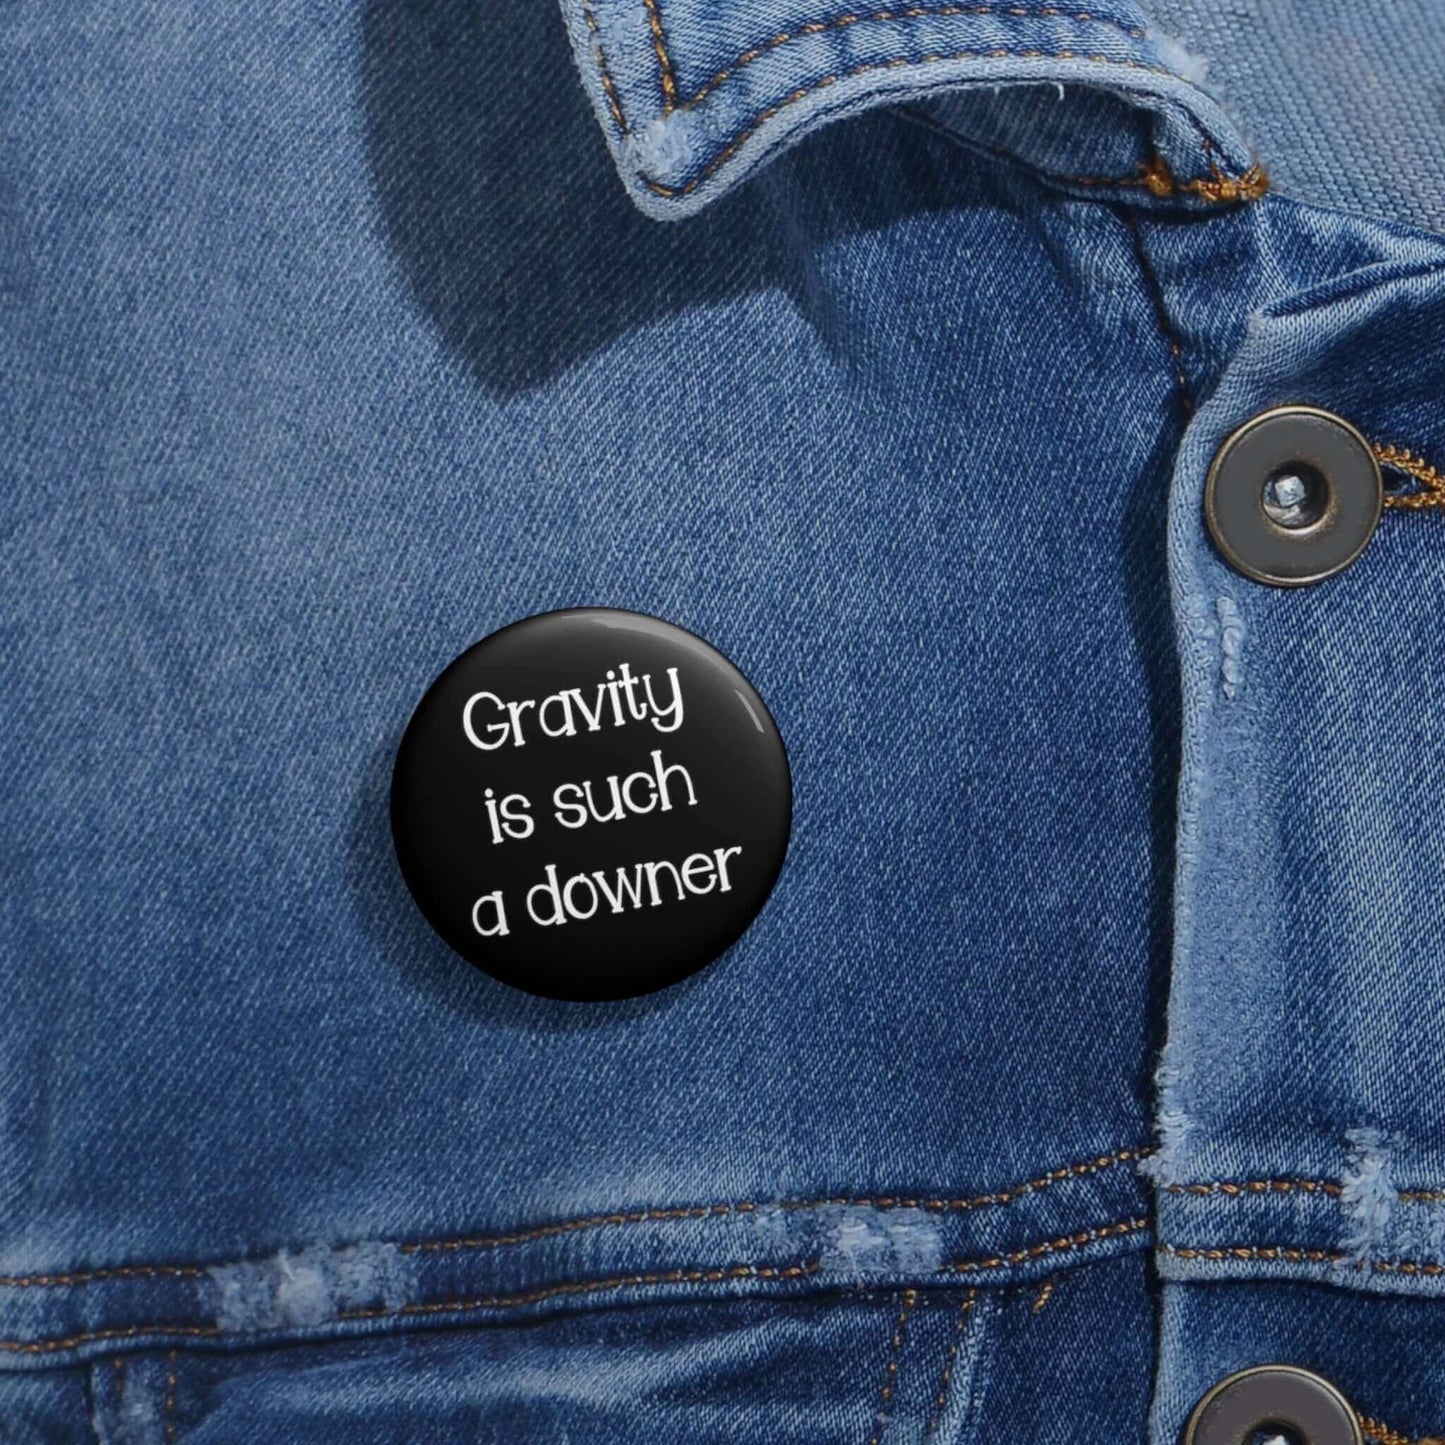 Gravity is such a downer funny pinback button.